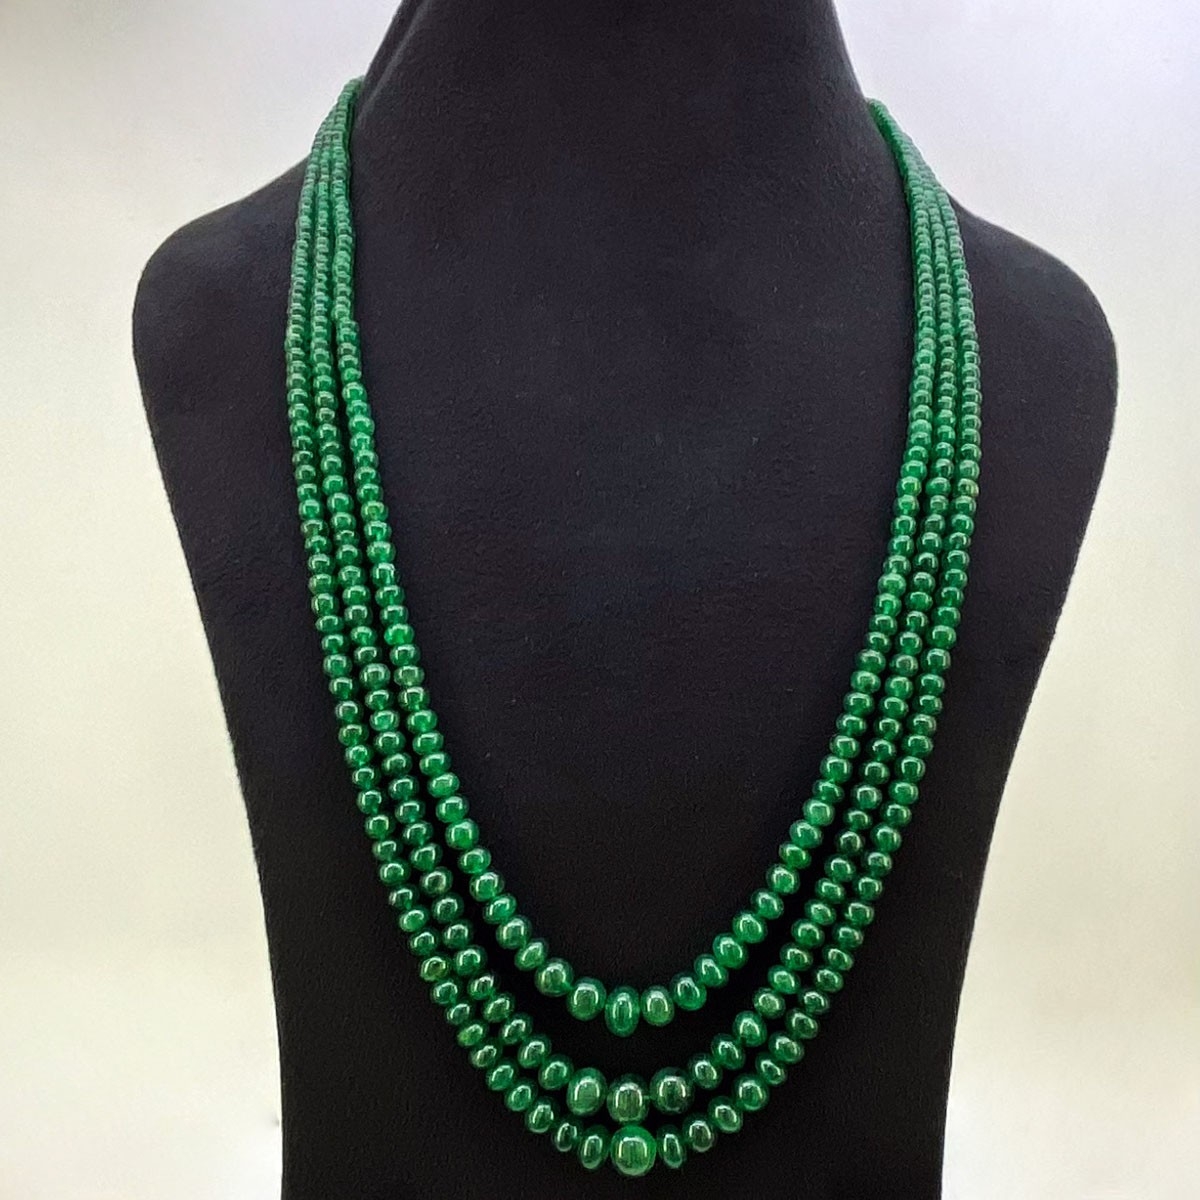 Emerald rondelle bead necklace with sterling silver spacers and